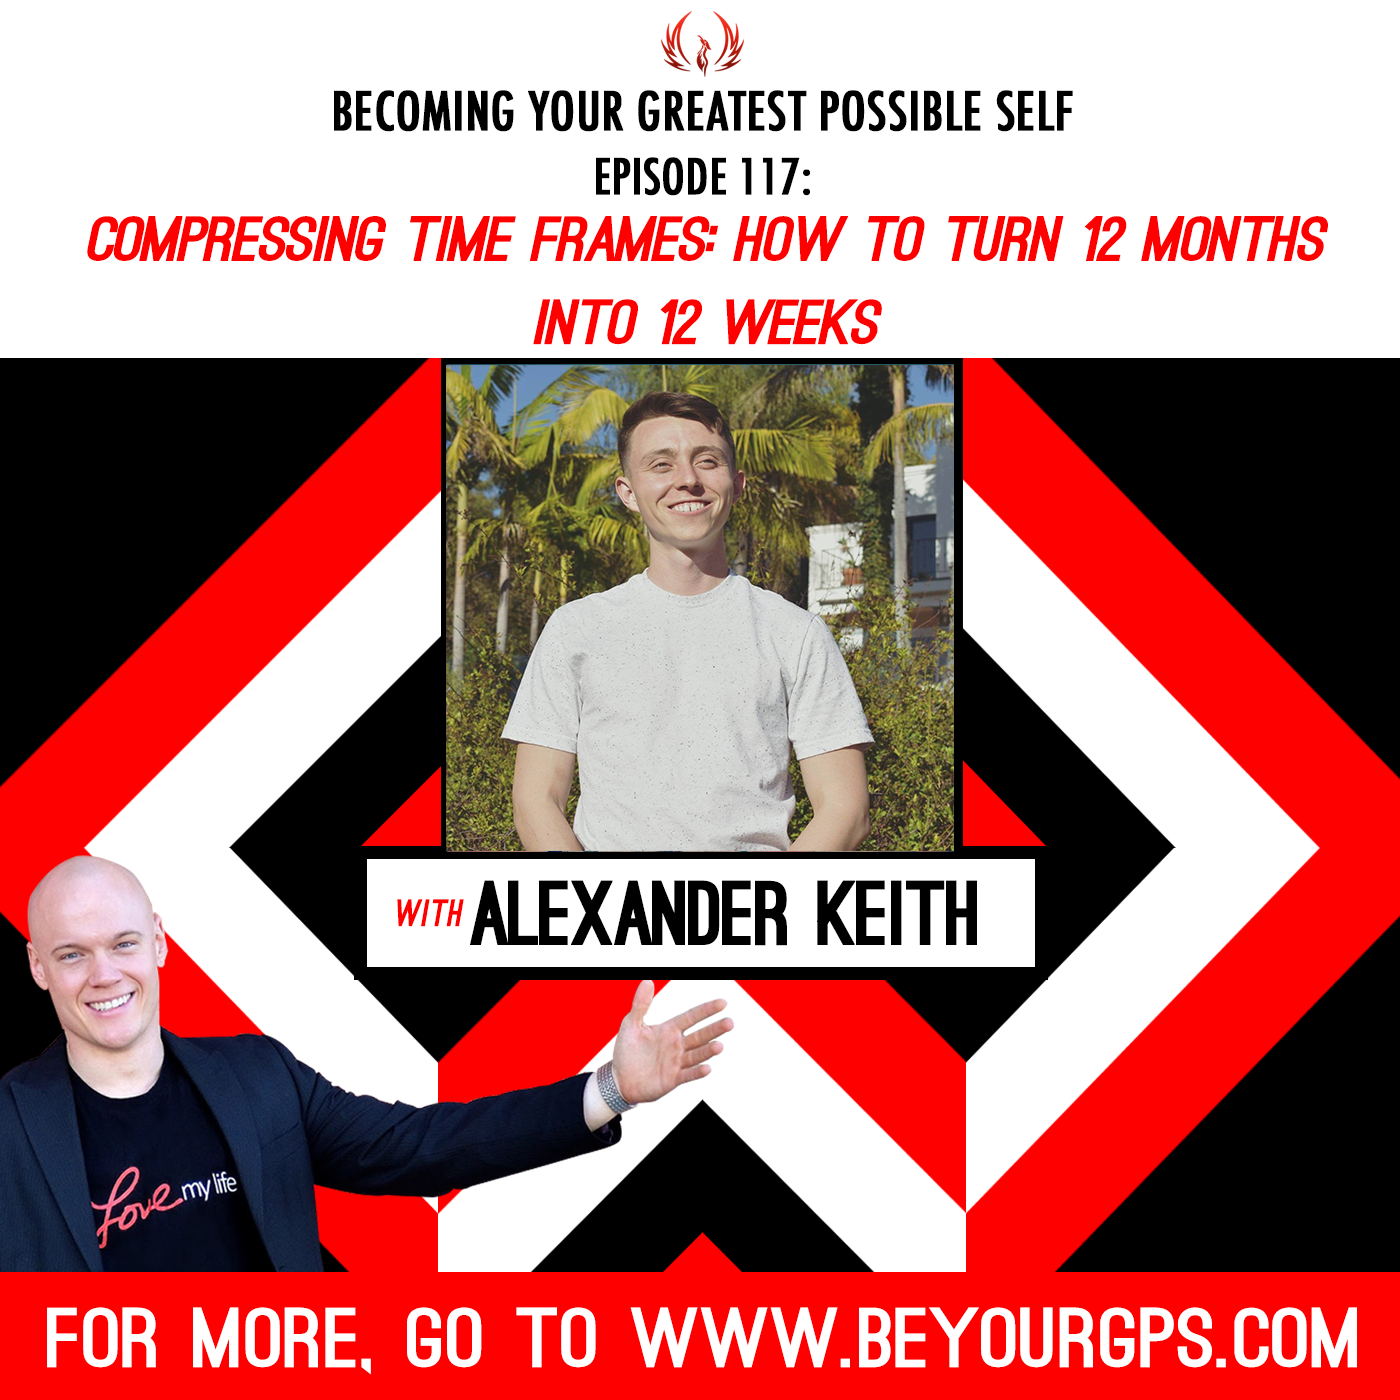 Compressing Time Frames: How to Turn 12 Months into 12 Weeks with Alexander Keith